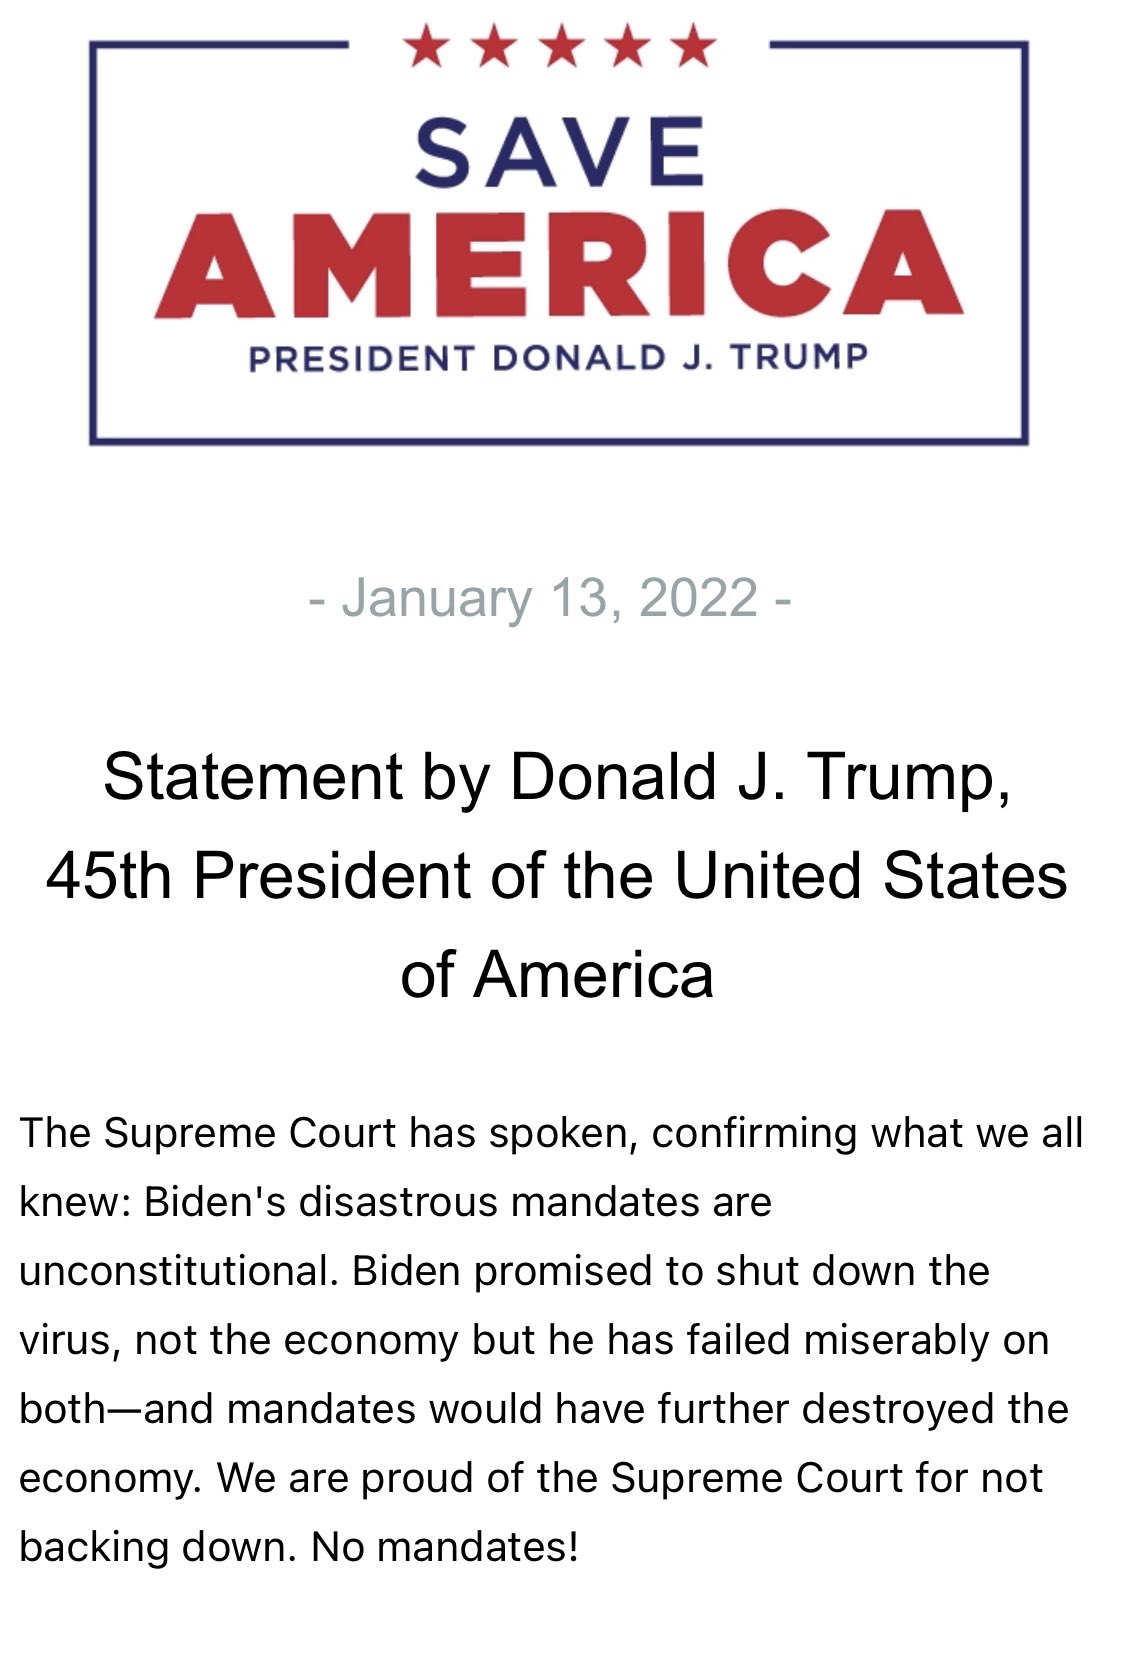 TRUMP STATEMENT: “The Supreme Court has spoken, confirming what we all knew: Biden's disastrous mandates are unconstitutional. Biden promised to shut down the virus, not the economy but he has failed miserably on both—and mandates would have further destroyed the economy.”